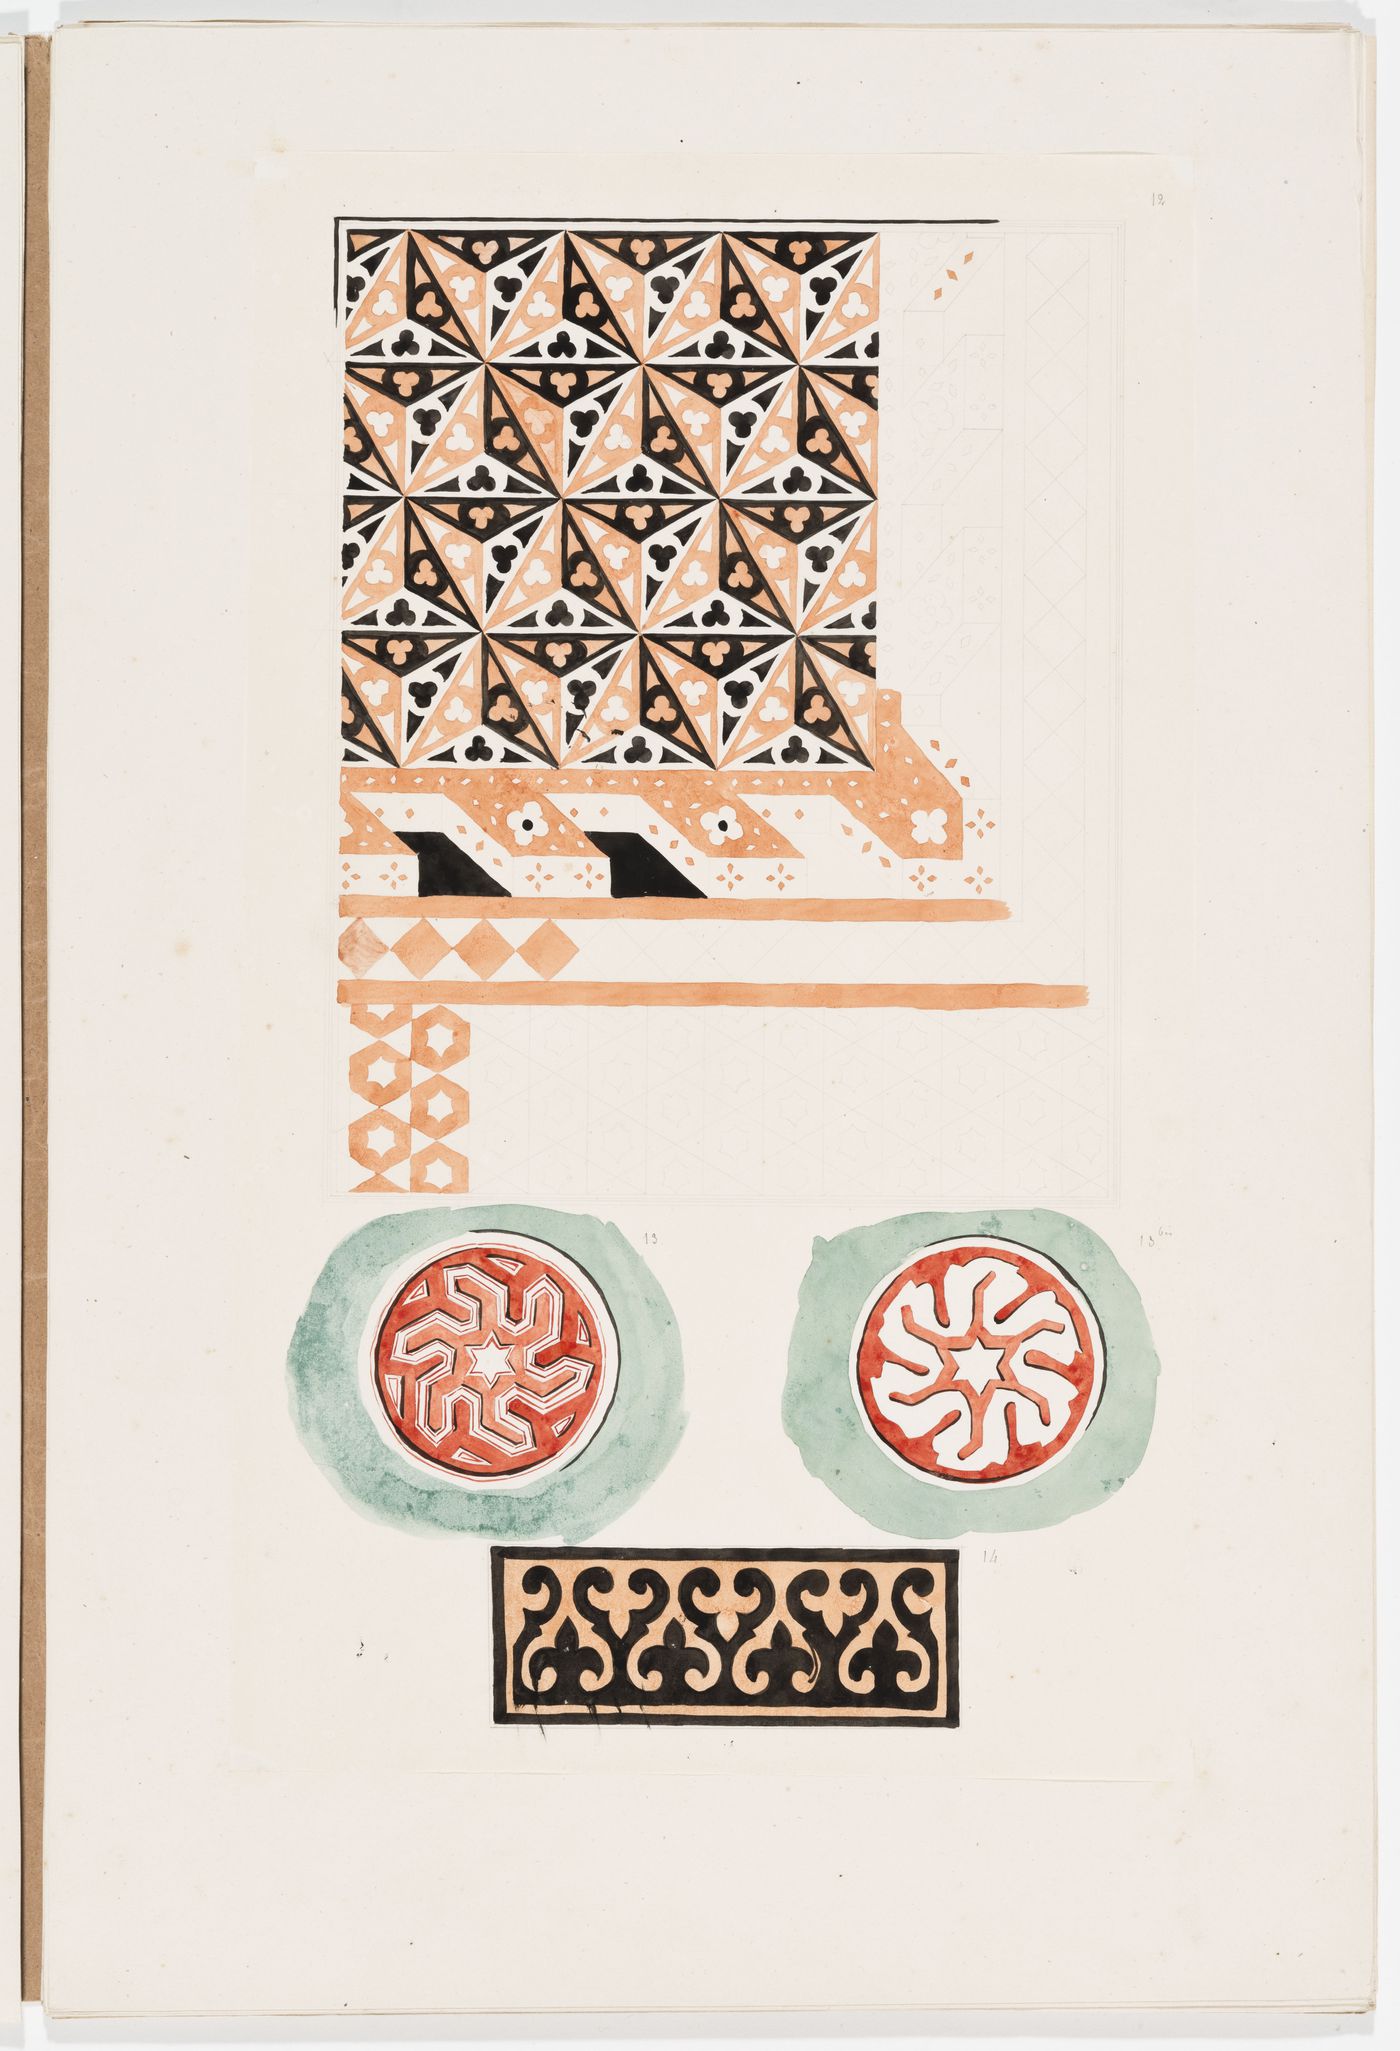 Ornament drawing of three panels decorated with geometric patterns and foliage